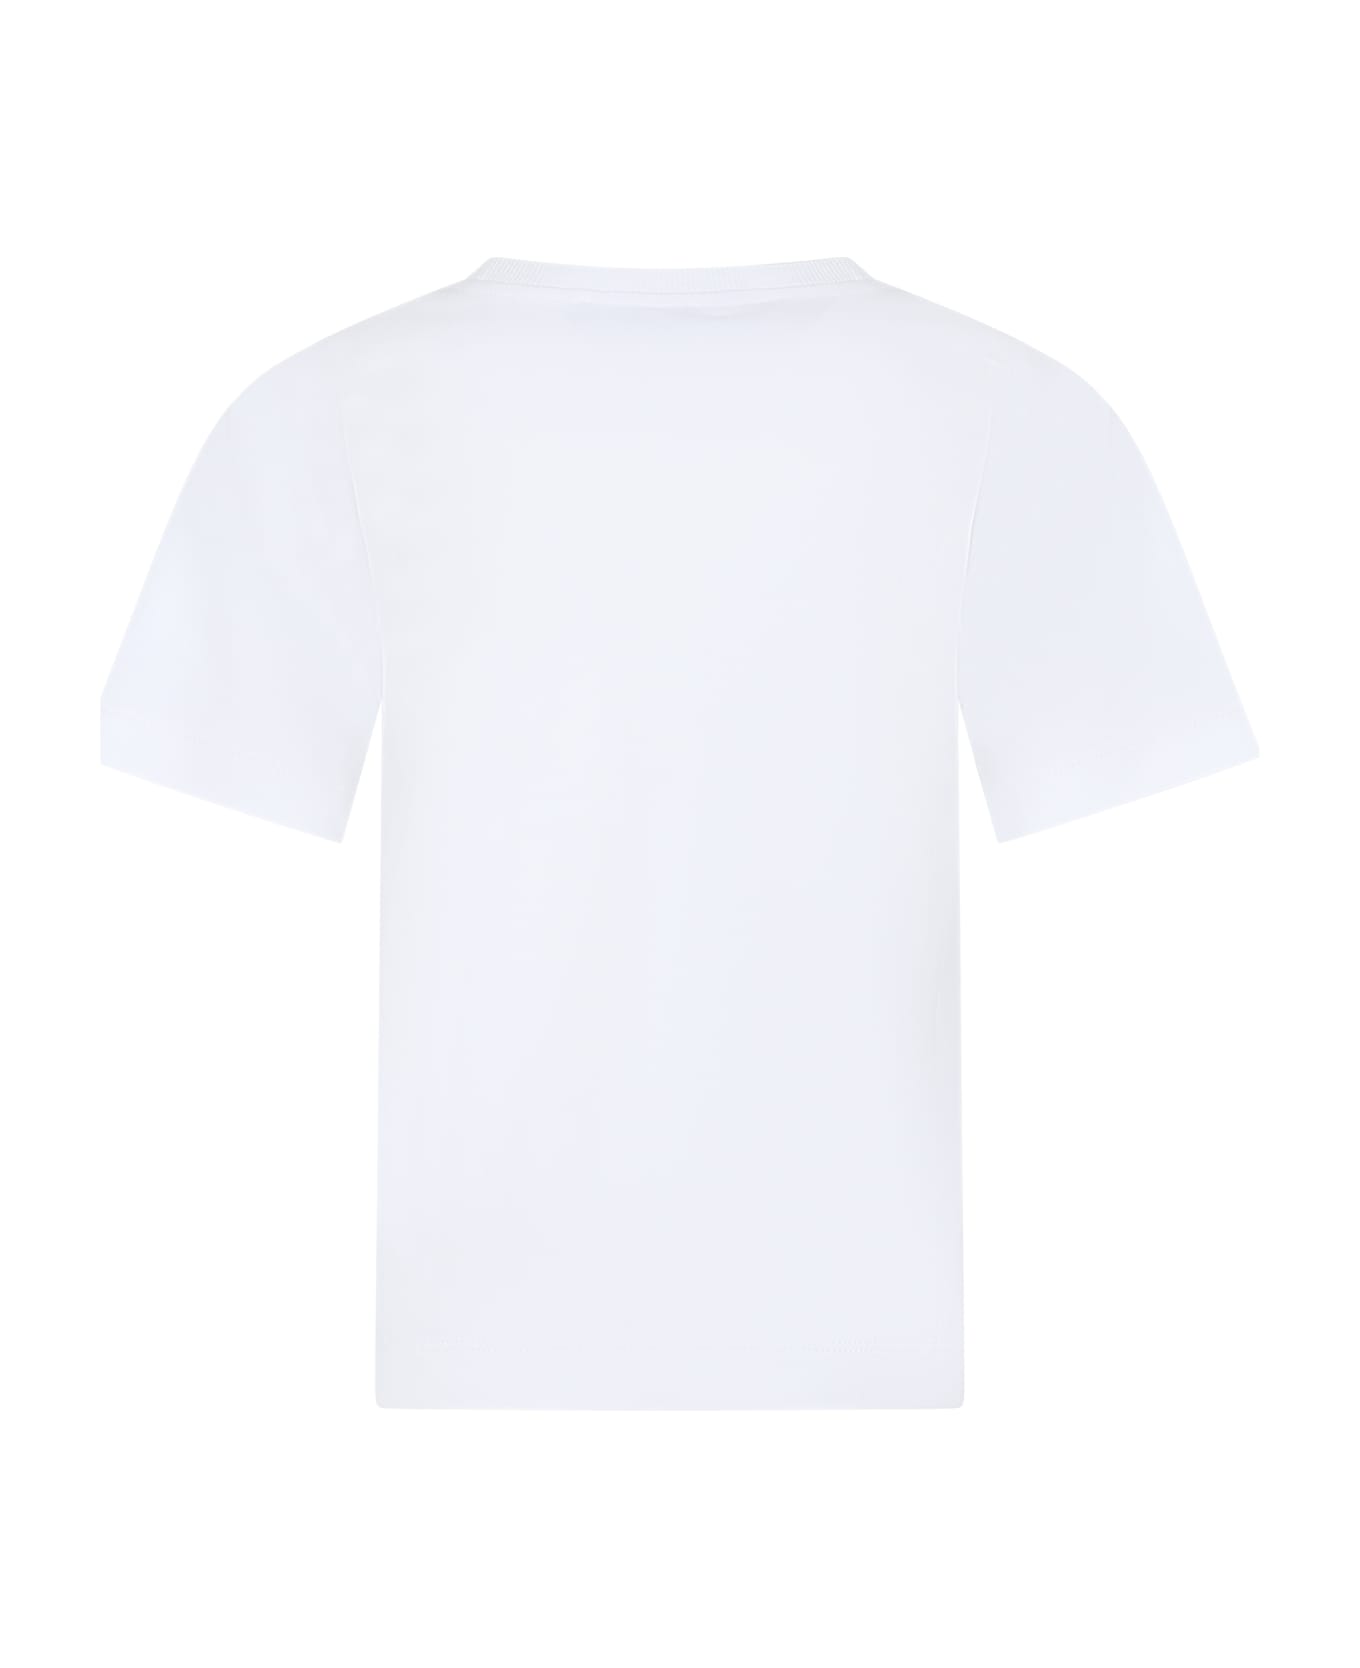 Moschino White T-shirt For Kids With Blue Logo - White